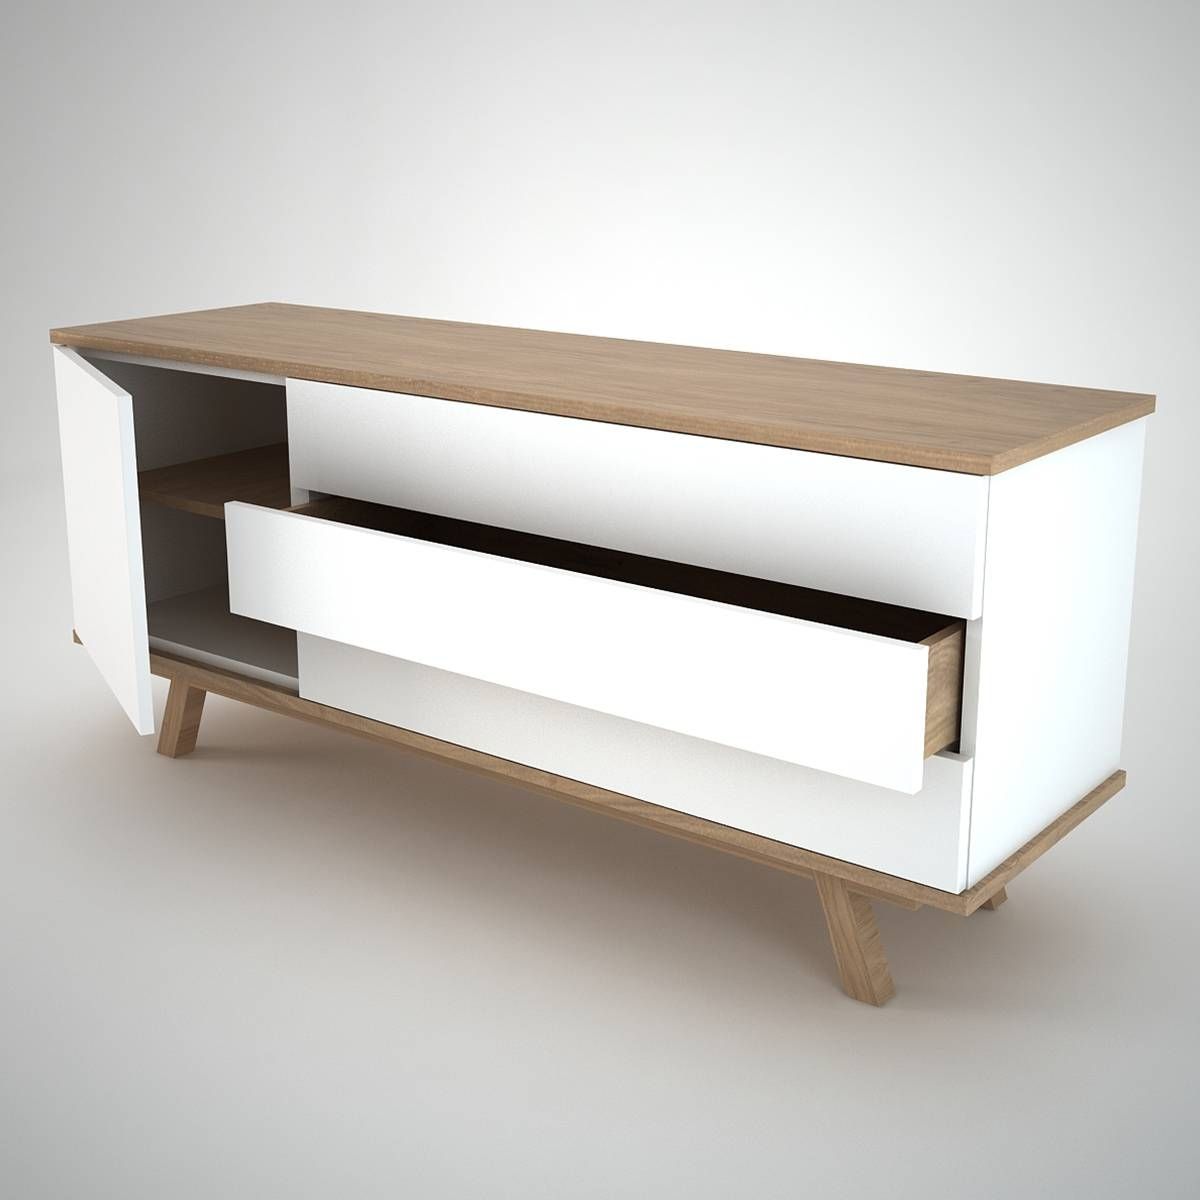 Furniture: Beautiful Profile Modern Sideboard For Living Room In White And Wood Sideboards (View 5 of 30)